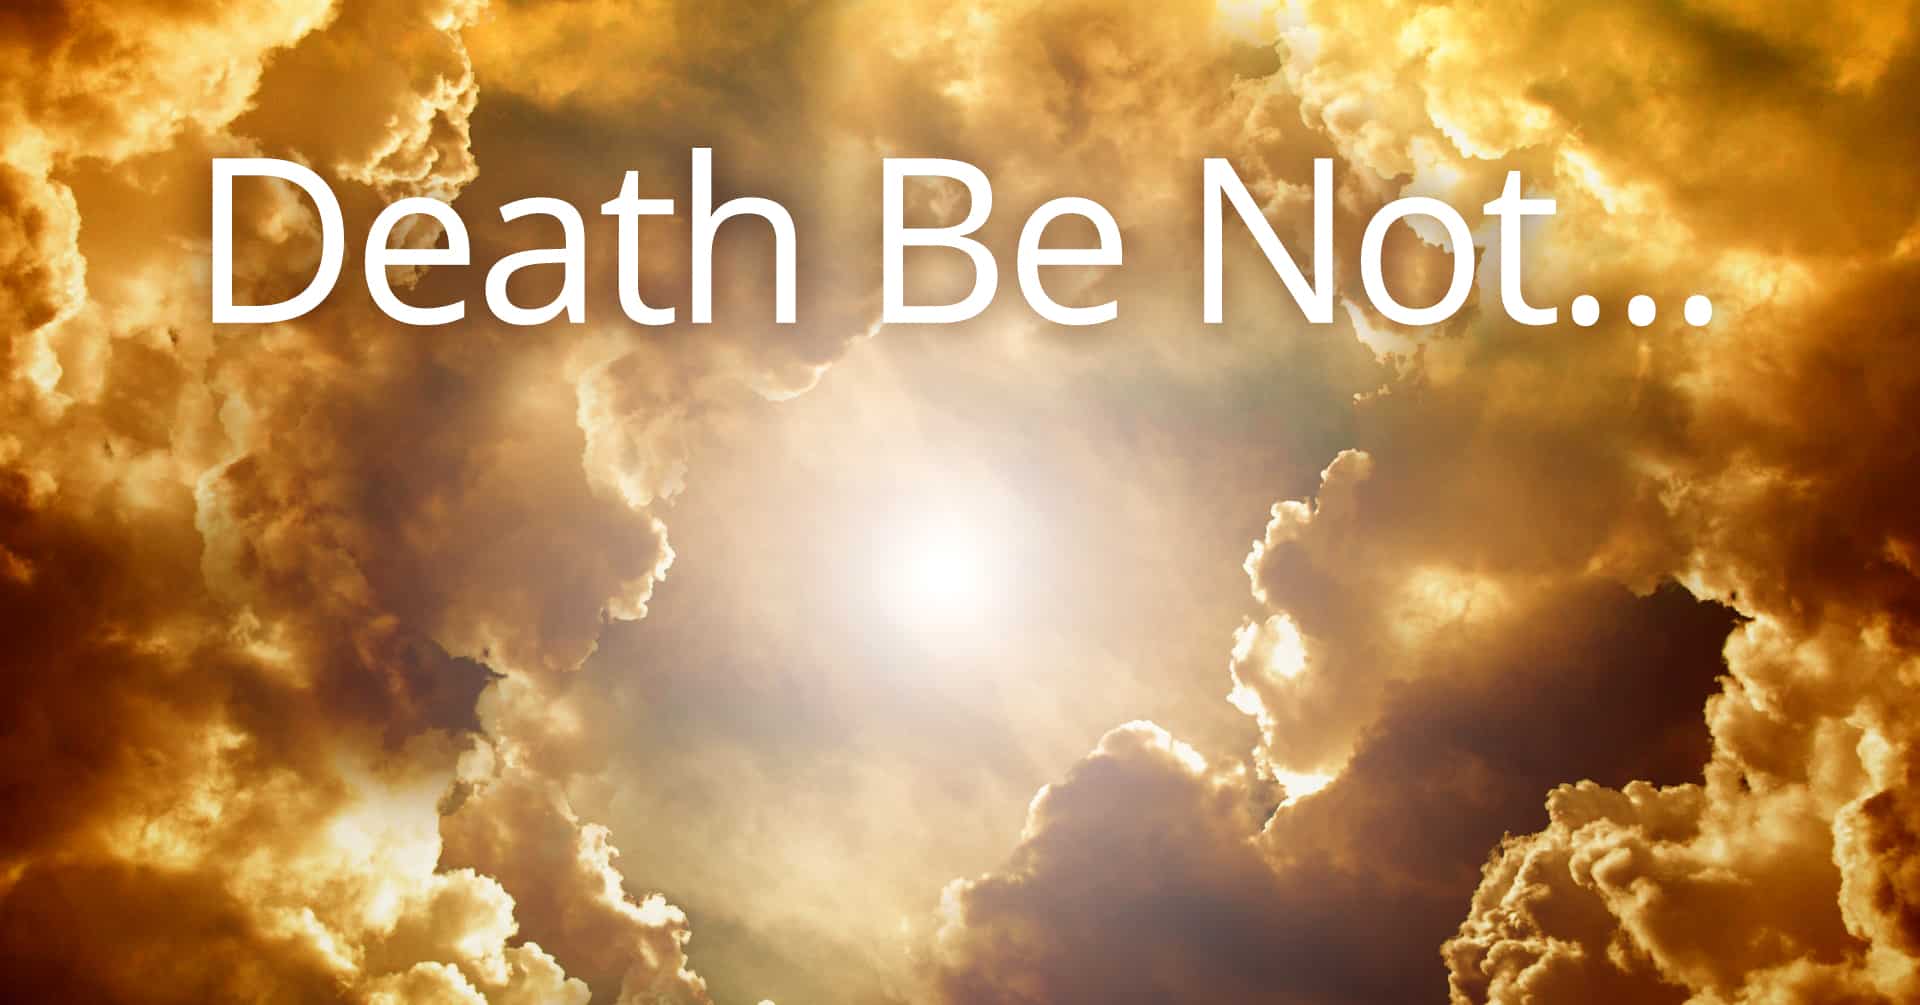 death be not - my question and answer session with God